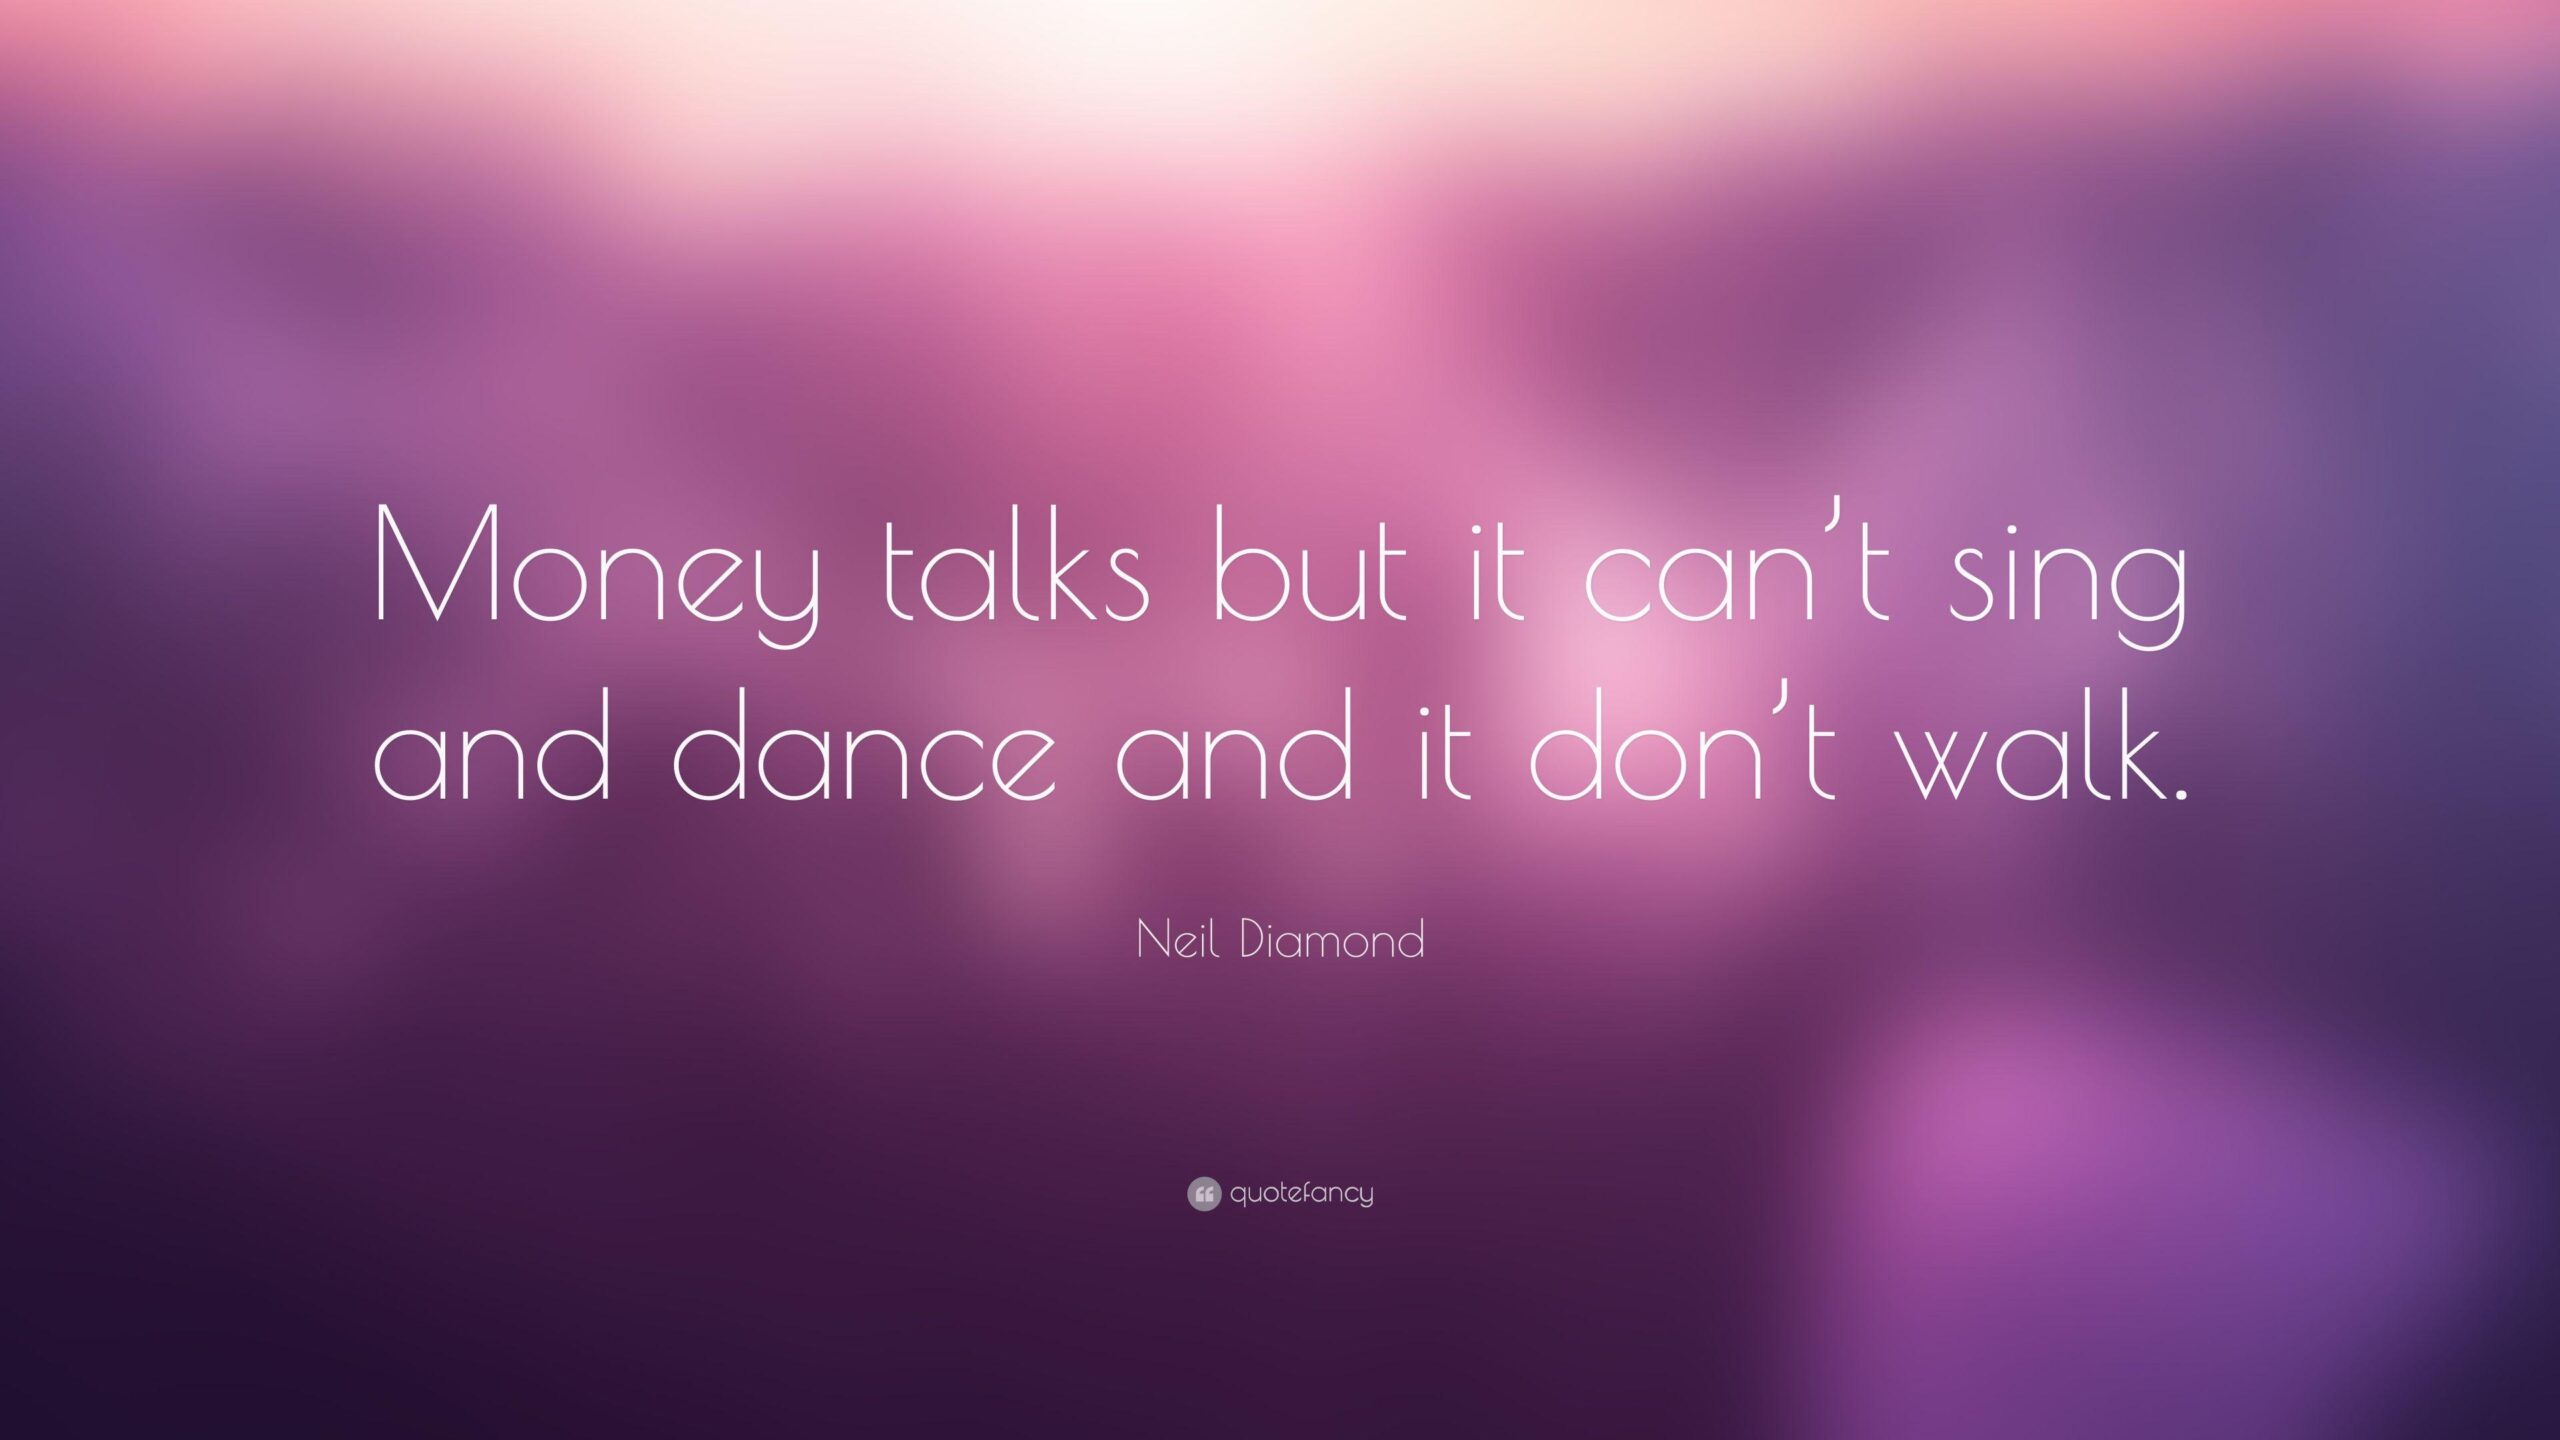 Neil Diamond Quote “Money talks but it can’t sing and dance and